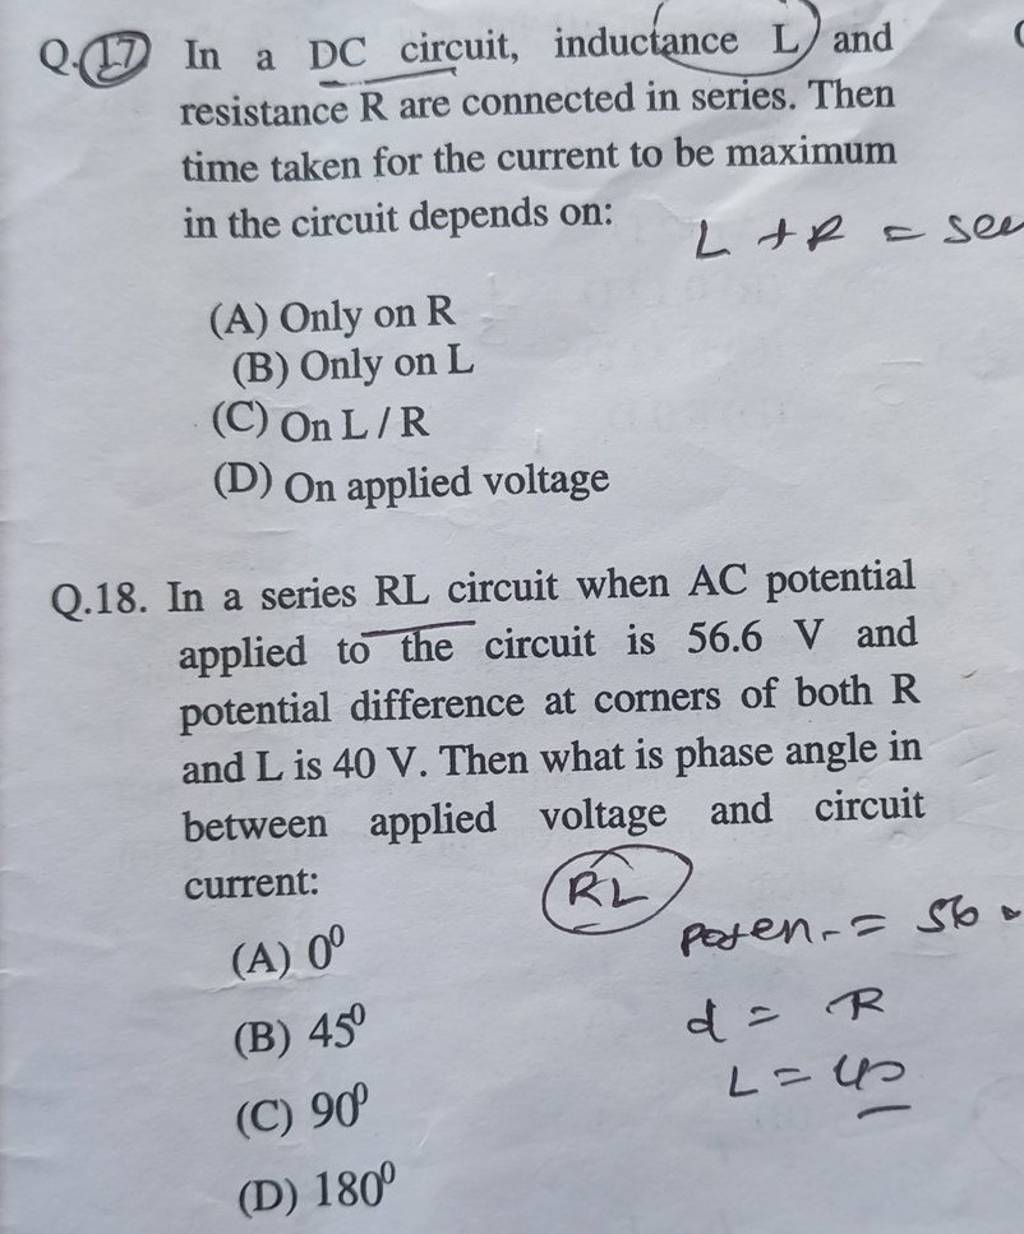 Q.18. In a series RL circuit when AC potential applied to the circuit 